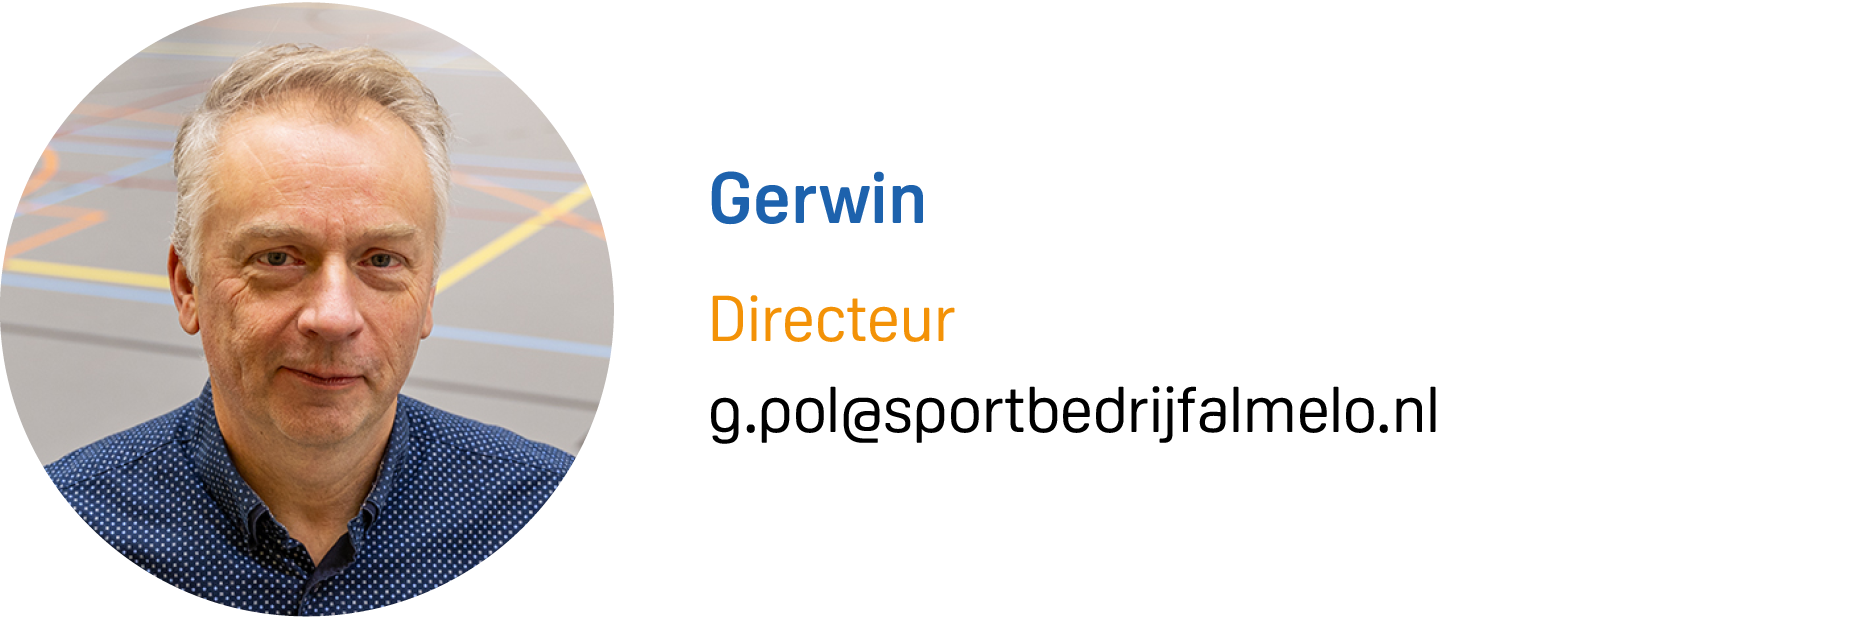 Gerwin Visite MAIL.png